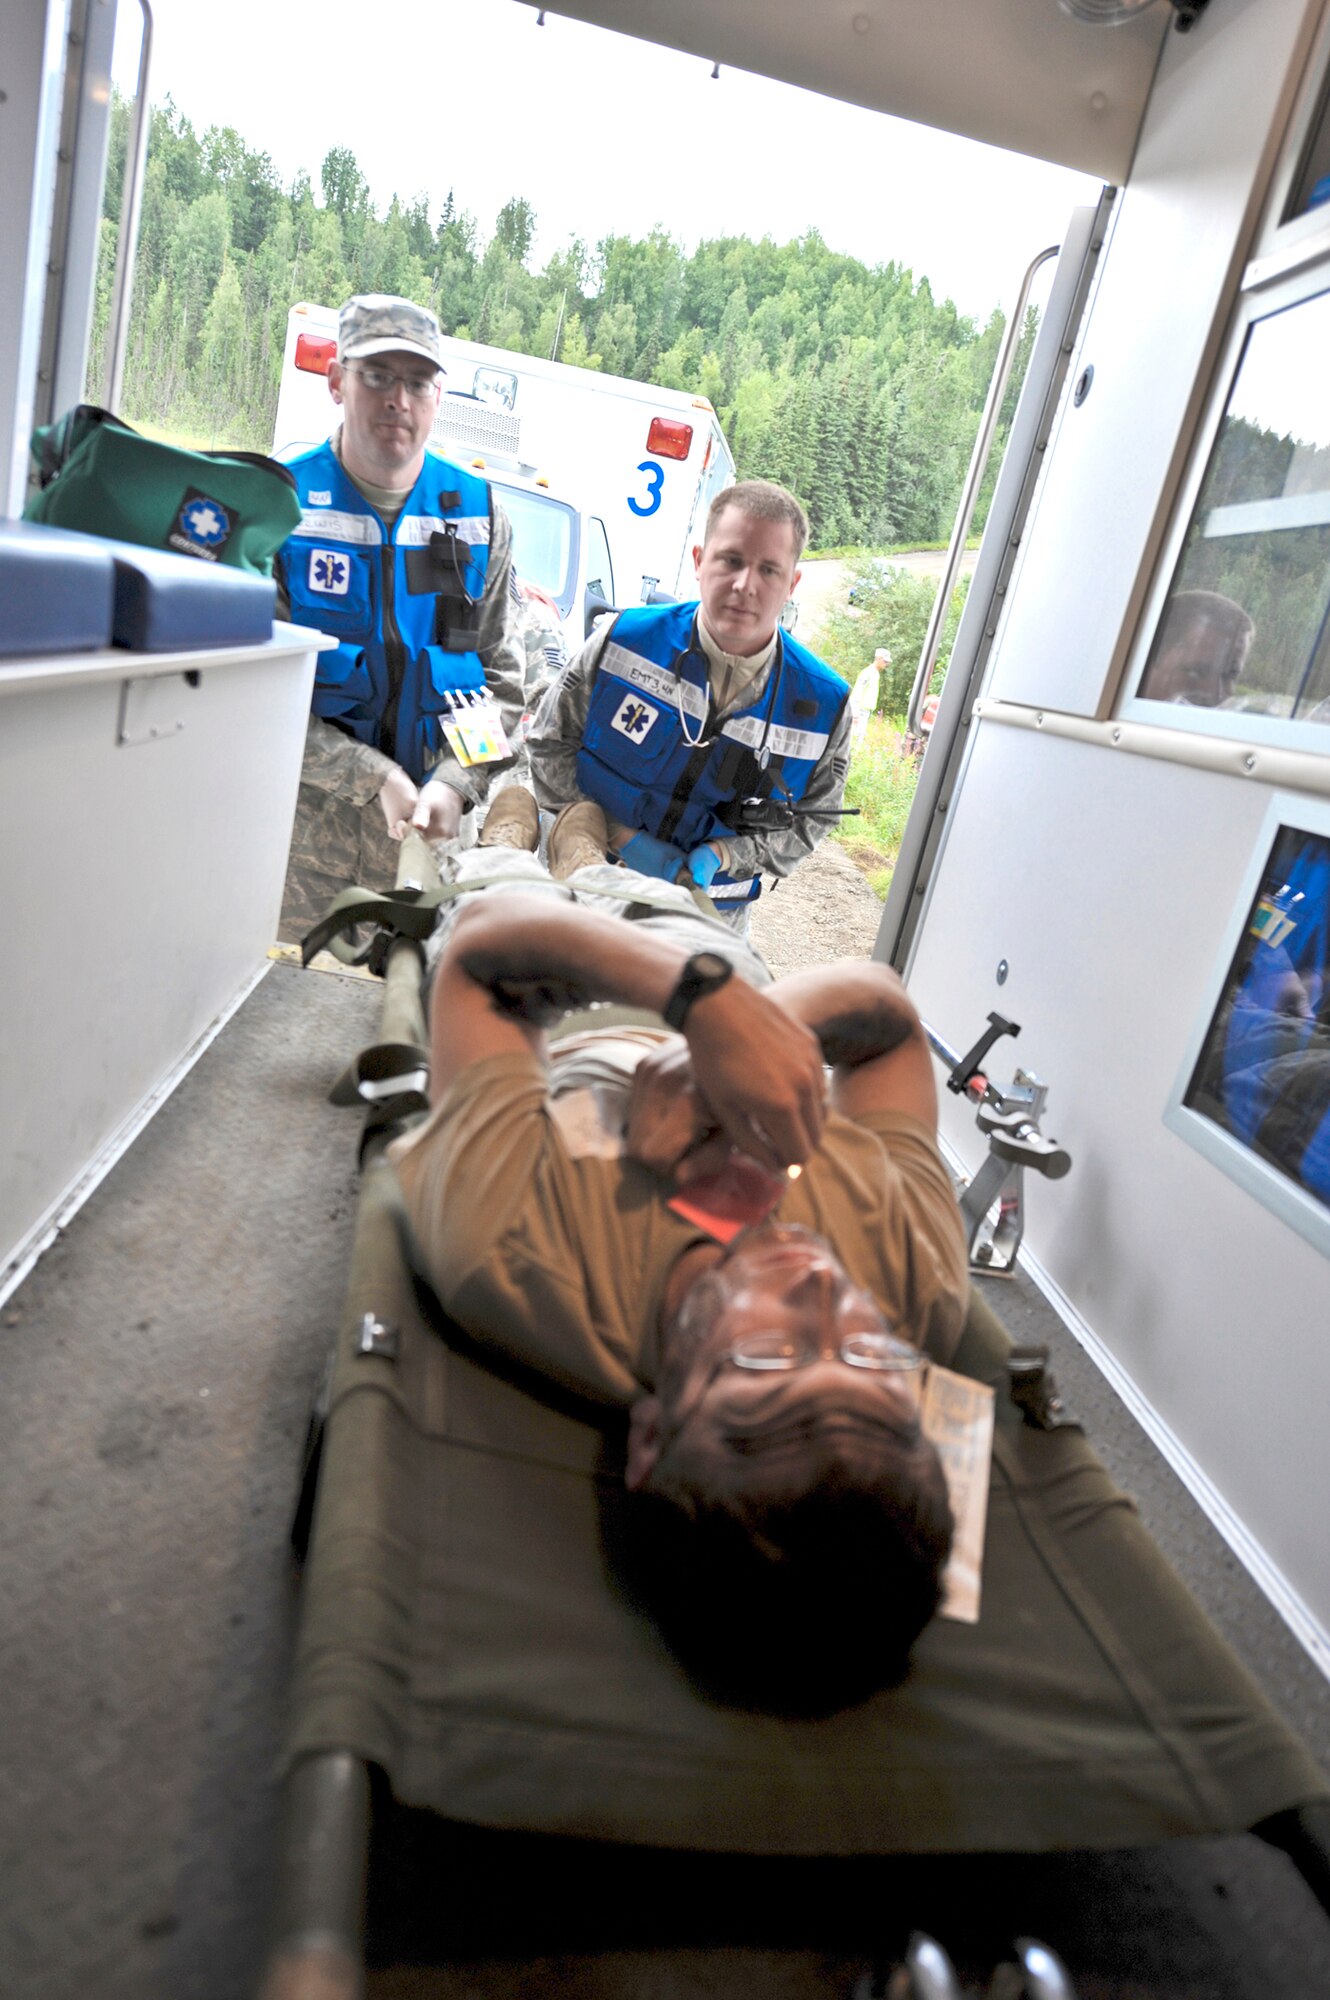 Participants in an Expeditionary Medical Support Training exercise load a "patient" into the back of an ambulance during a simulated bridge collapse scenario Aug. 12, 2010, at Joint Base Elmendorf-Richardson, Alaska. (U.S. Air Force photo/Airman 1st Class Christopher Gross)